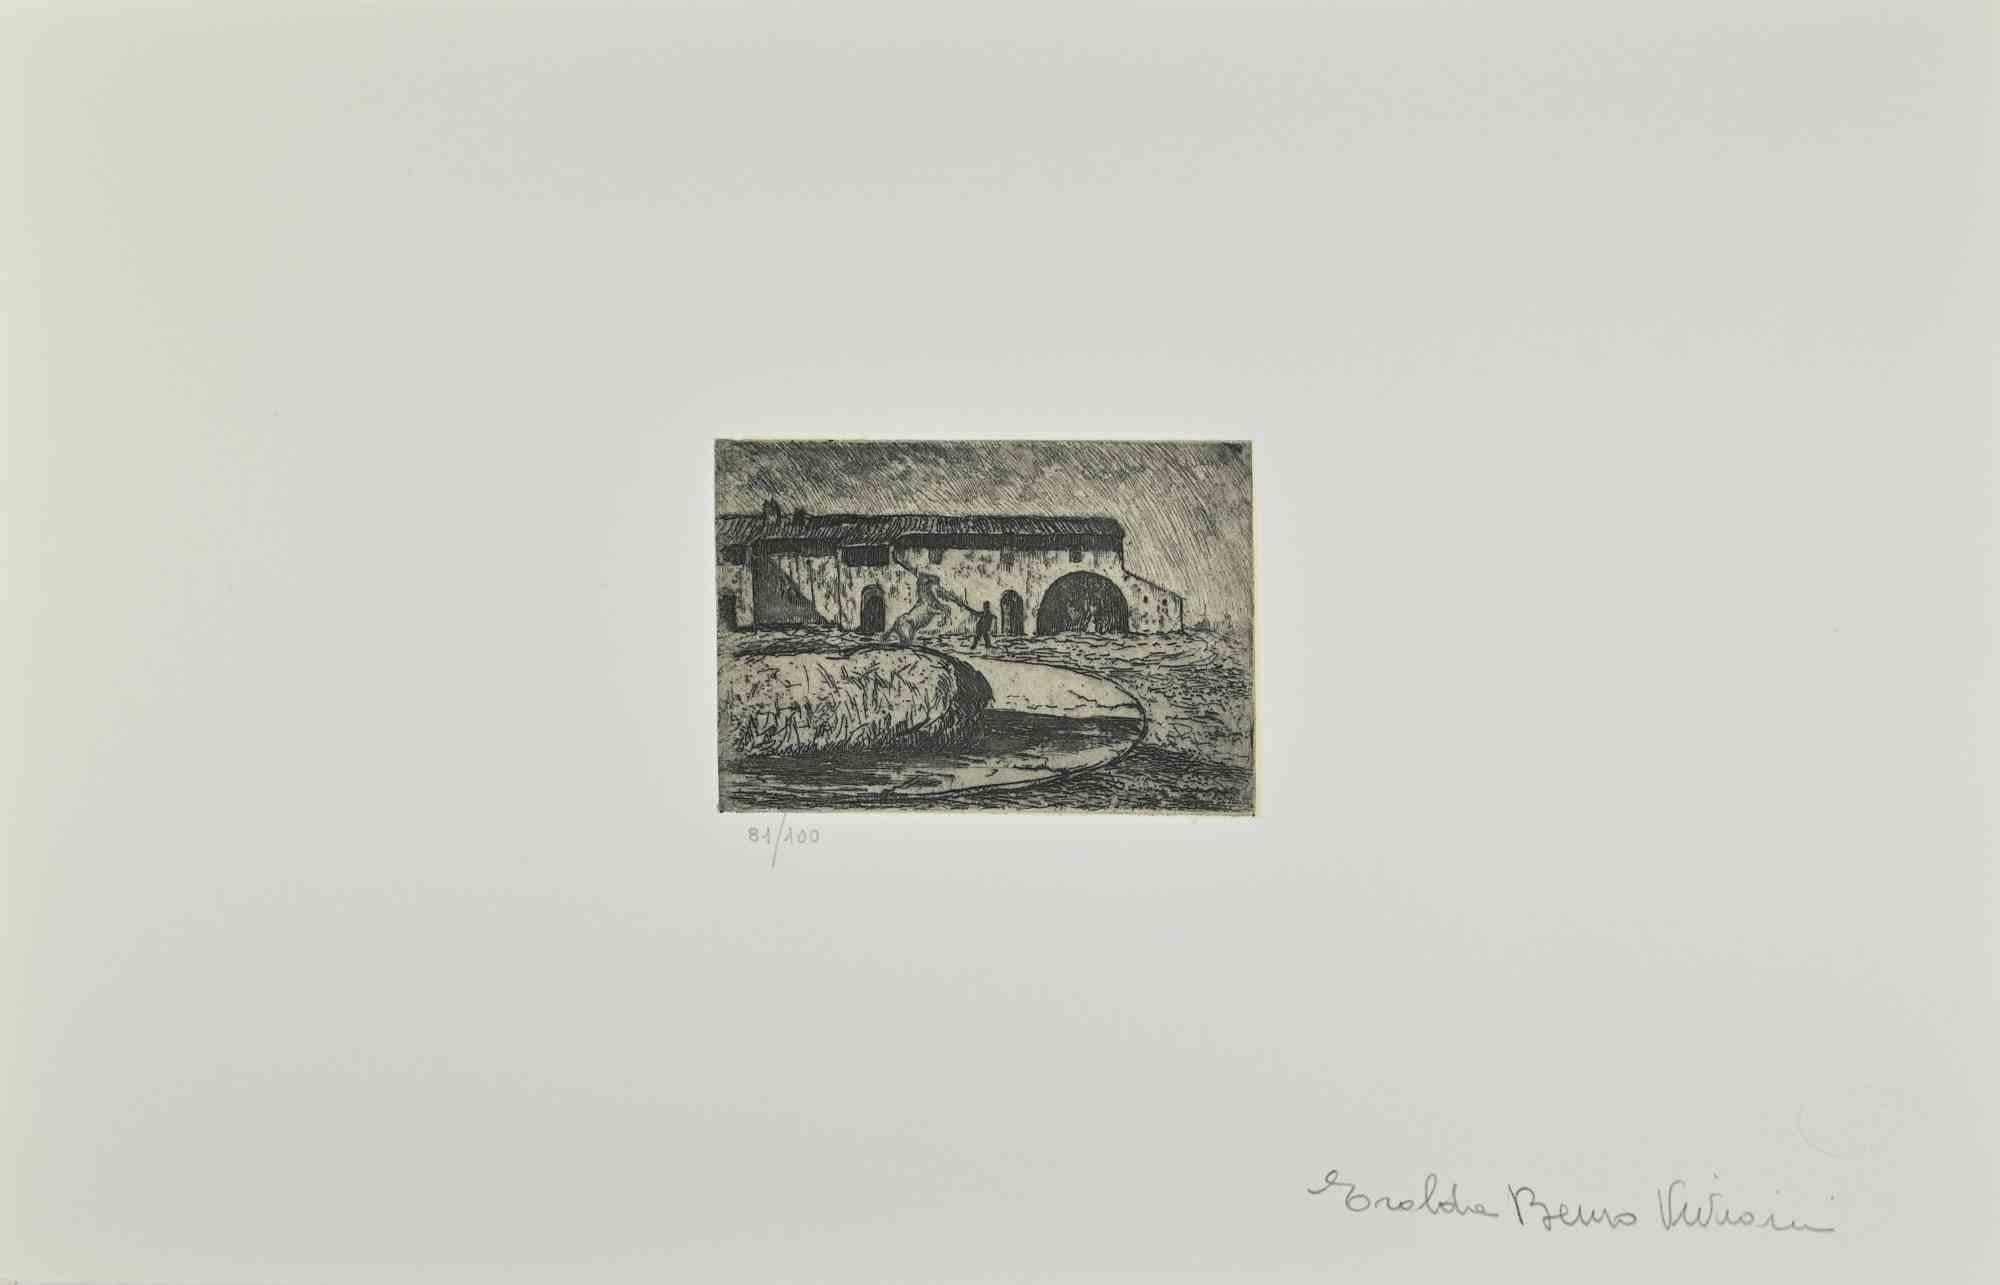 The Farmer  is an artwork realized after  Giuseppe Viviani,  in 1925s . 

Etching on paper. Limited edition of 10, ex. n. 81.

The state of preservation is very good.

Signed by the Artist widow "Eralda Benso Viviani". Reference: G. Marino, Giuseppe